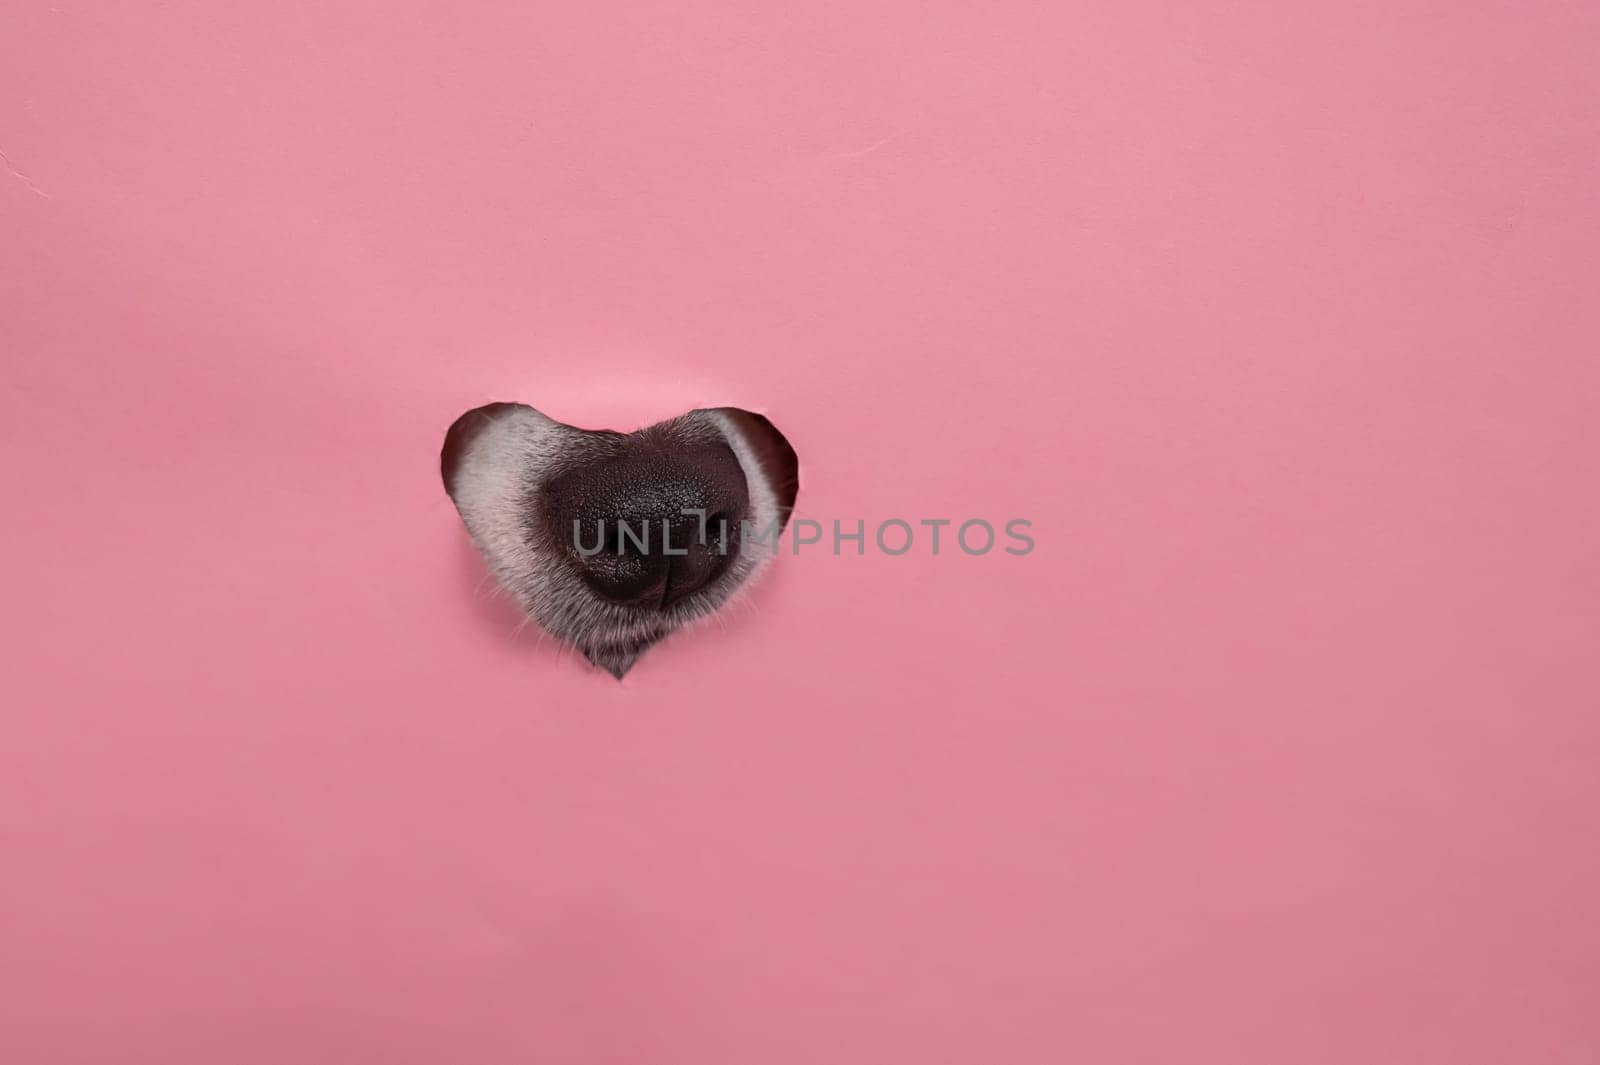 A dog's nose sticks out of a pink cardboard background. A hole in the shape of a heart